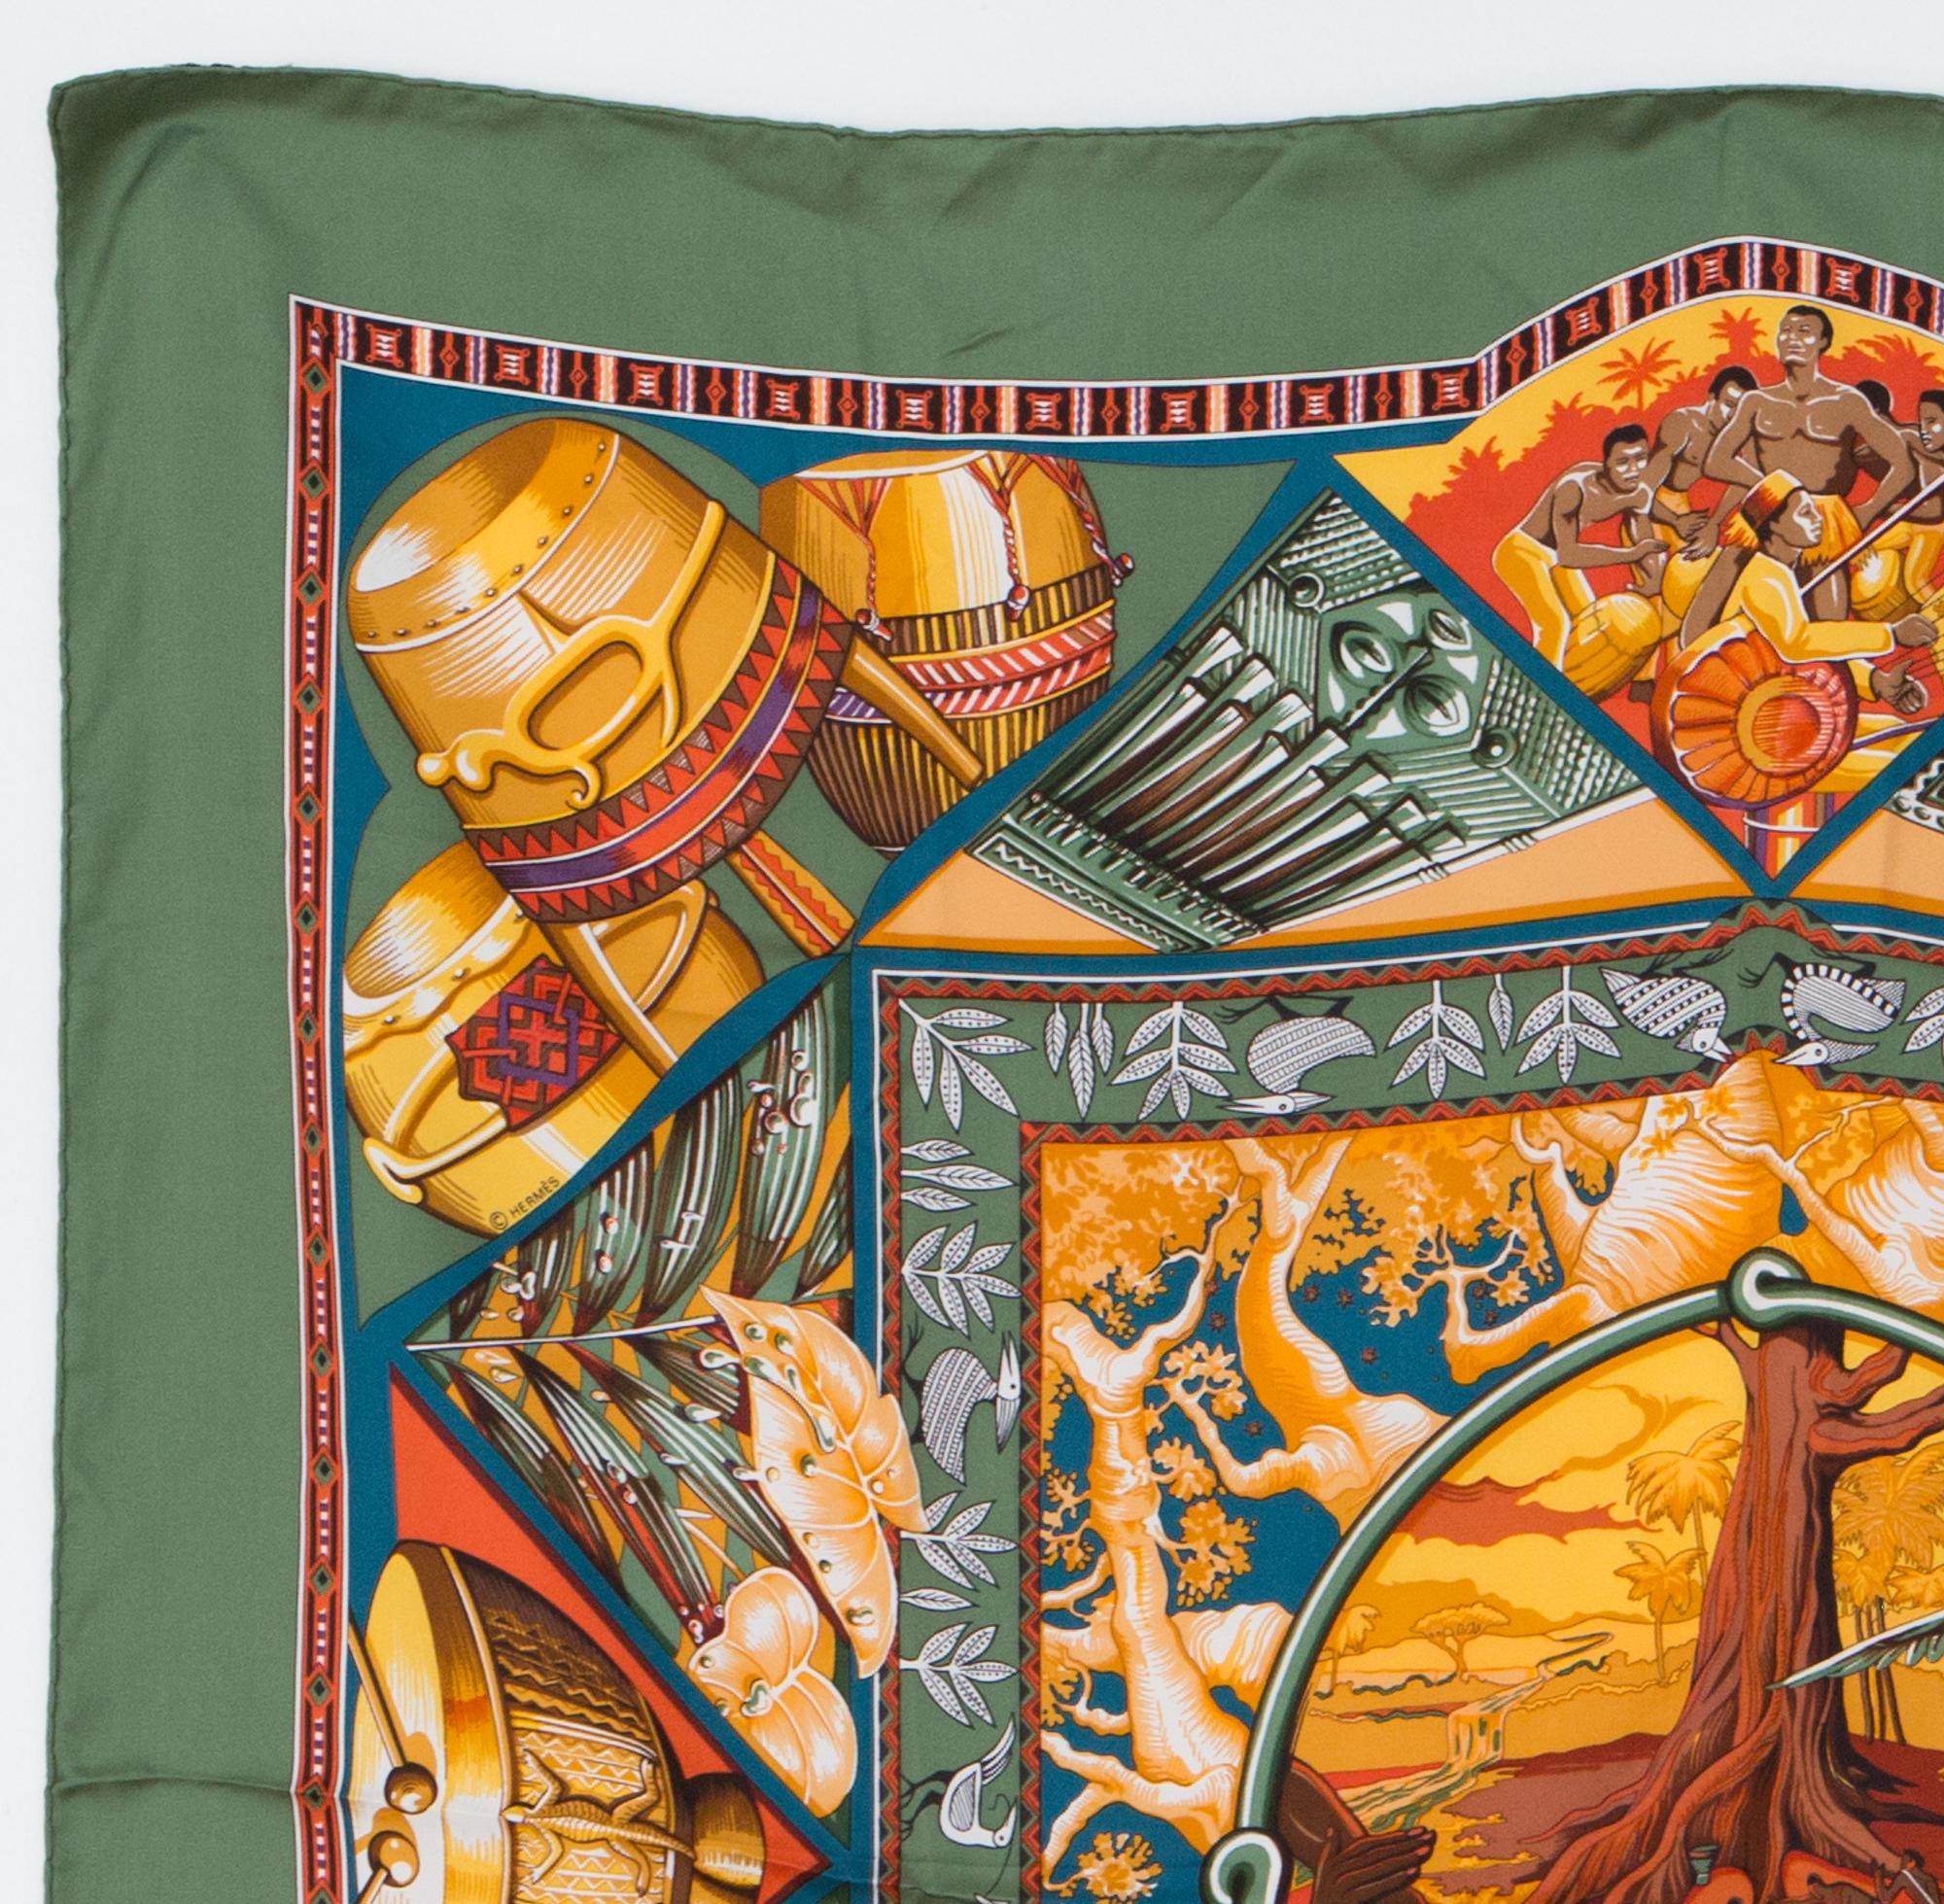 1998s Hermes silk scarf Au Son du Tam Tam by Laurence Bourthoumieux Toutsy from Hermès Vintage featuring a scene celebrating the sounds of African drums, and a kaki border.
In excellent vintage condition. Made in France.
35,4in. (90cm) X 35,4in.